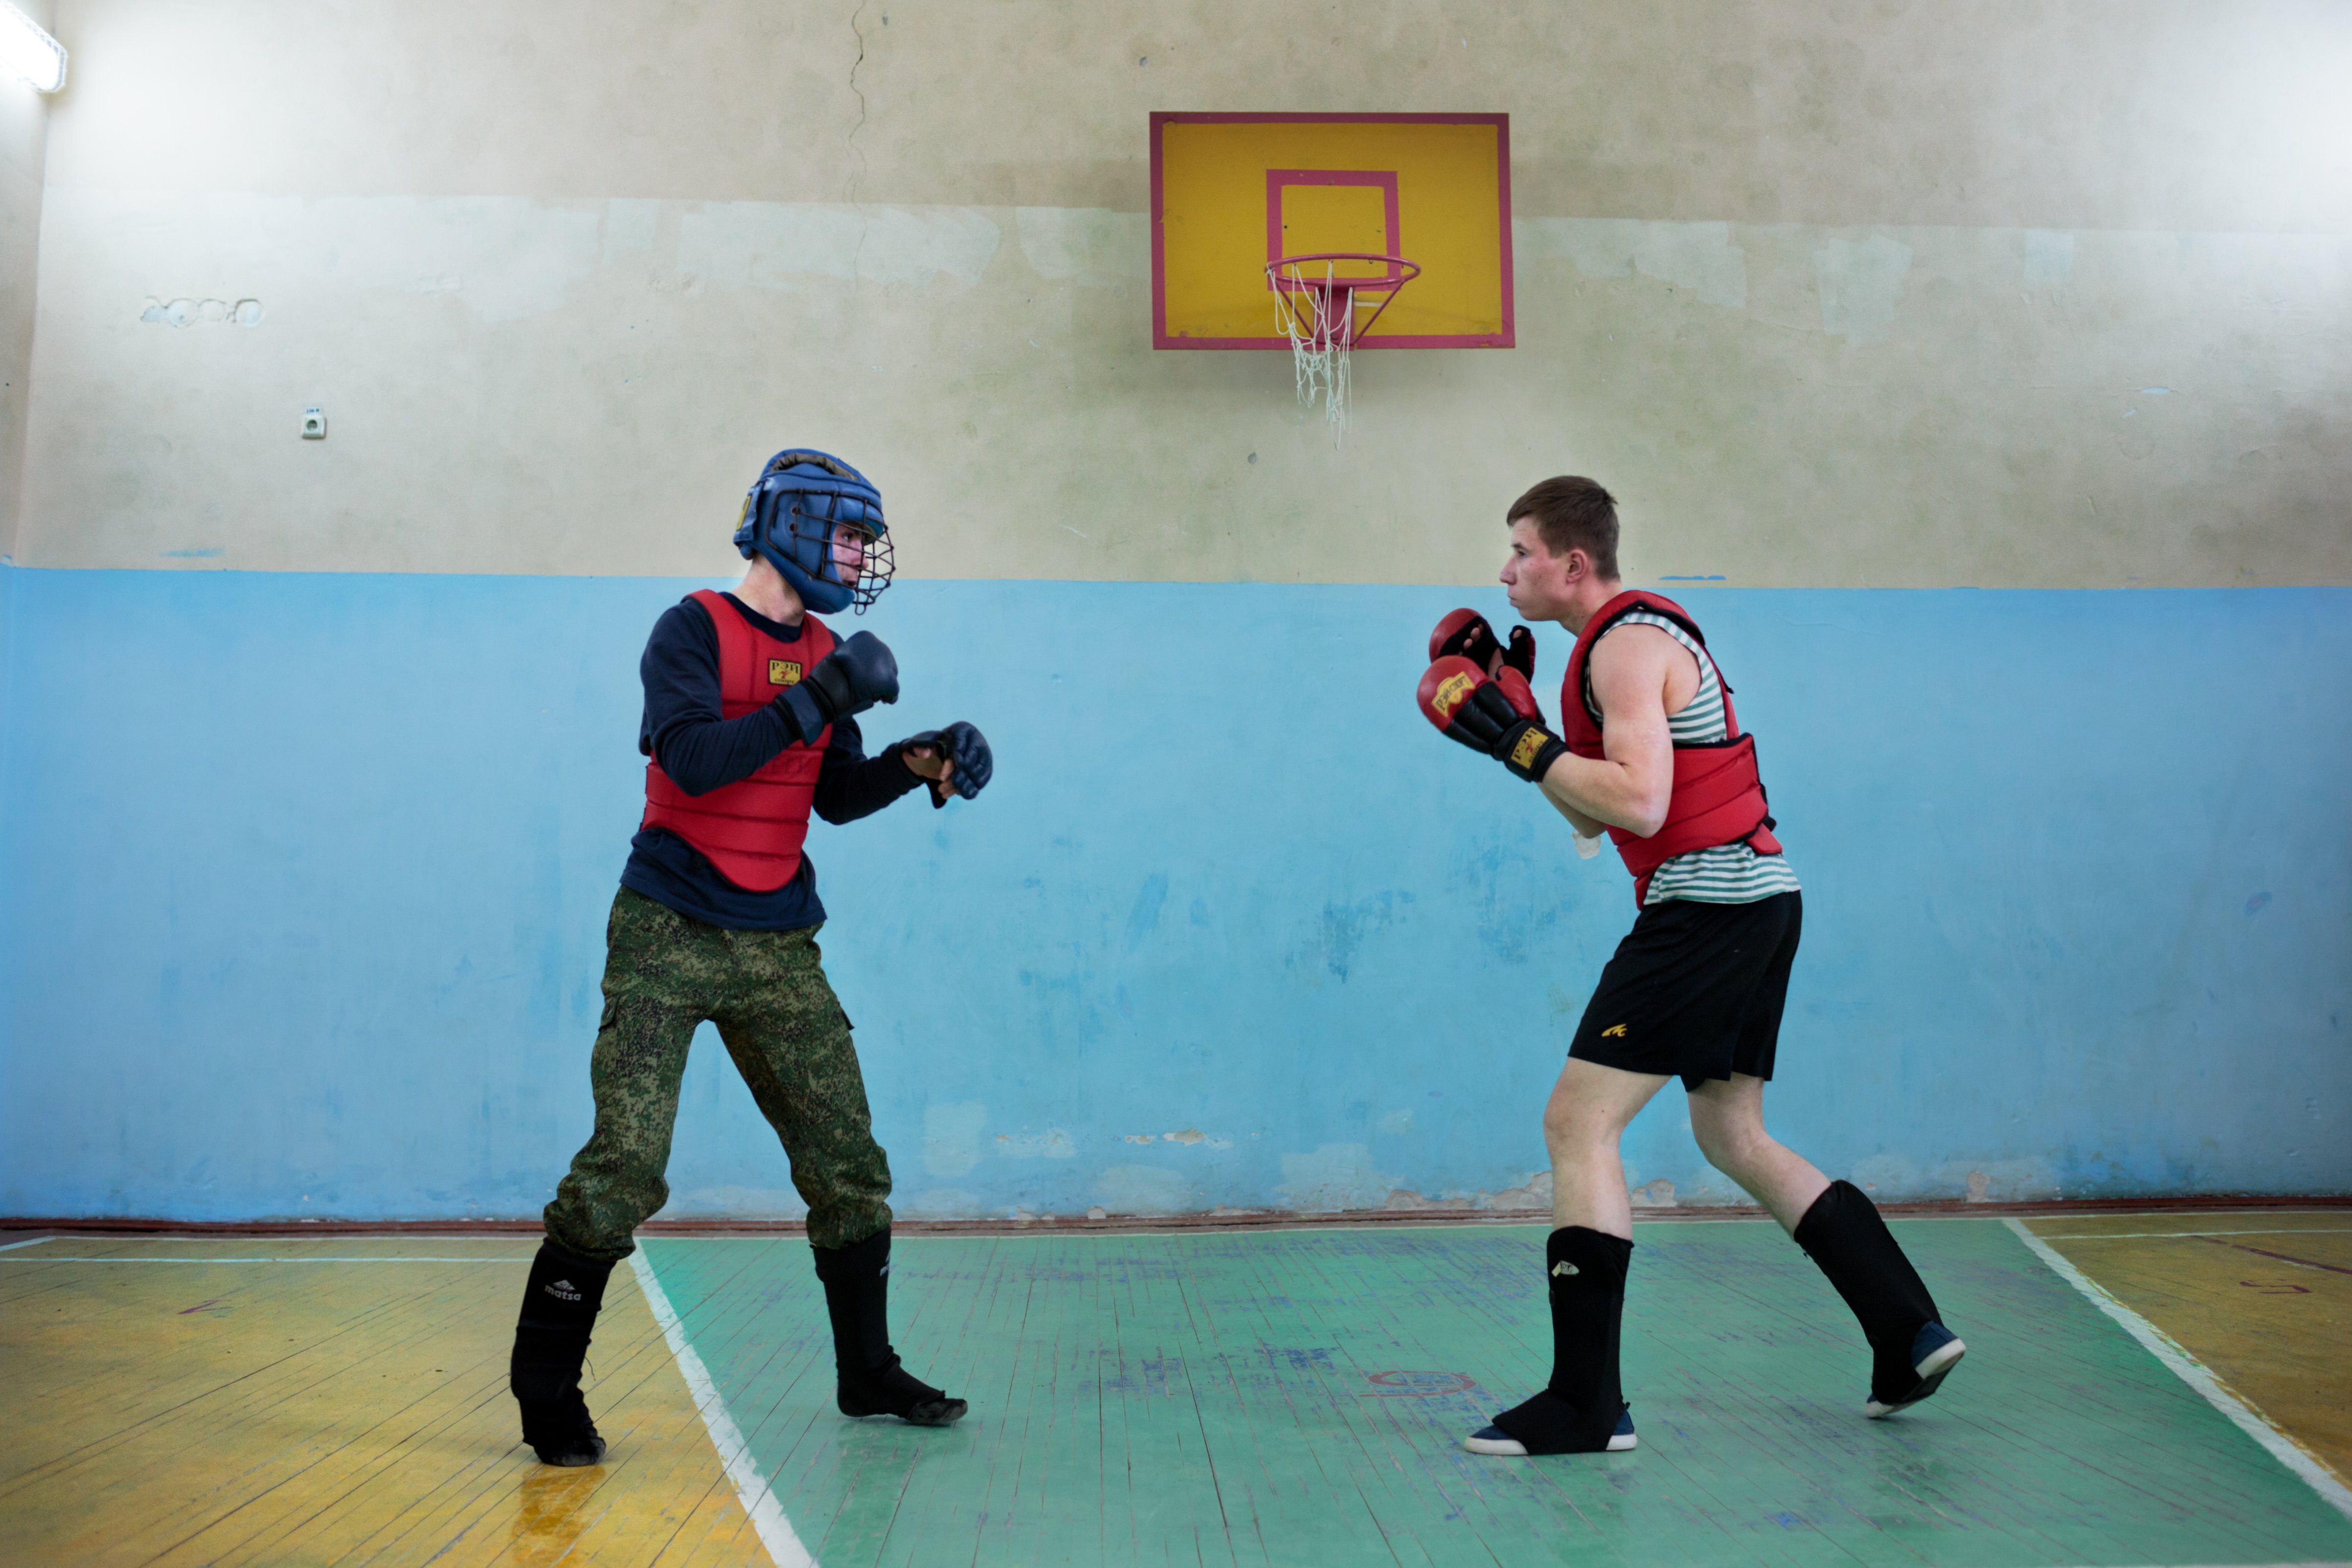 Students practice boxing and martial arts after school at the Diveevo Public School gymnasium on Apr. 6, 2016 in Diveevo, Russia. (Sarah Blesener)